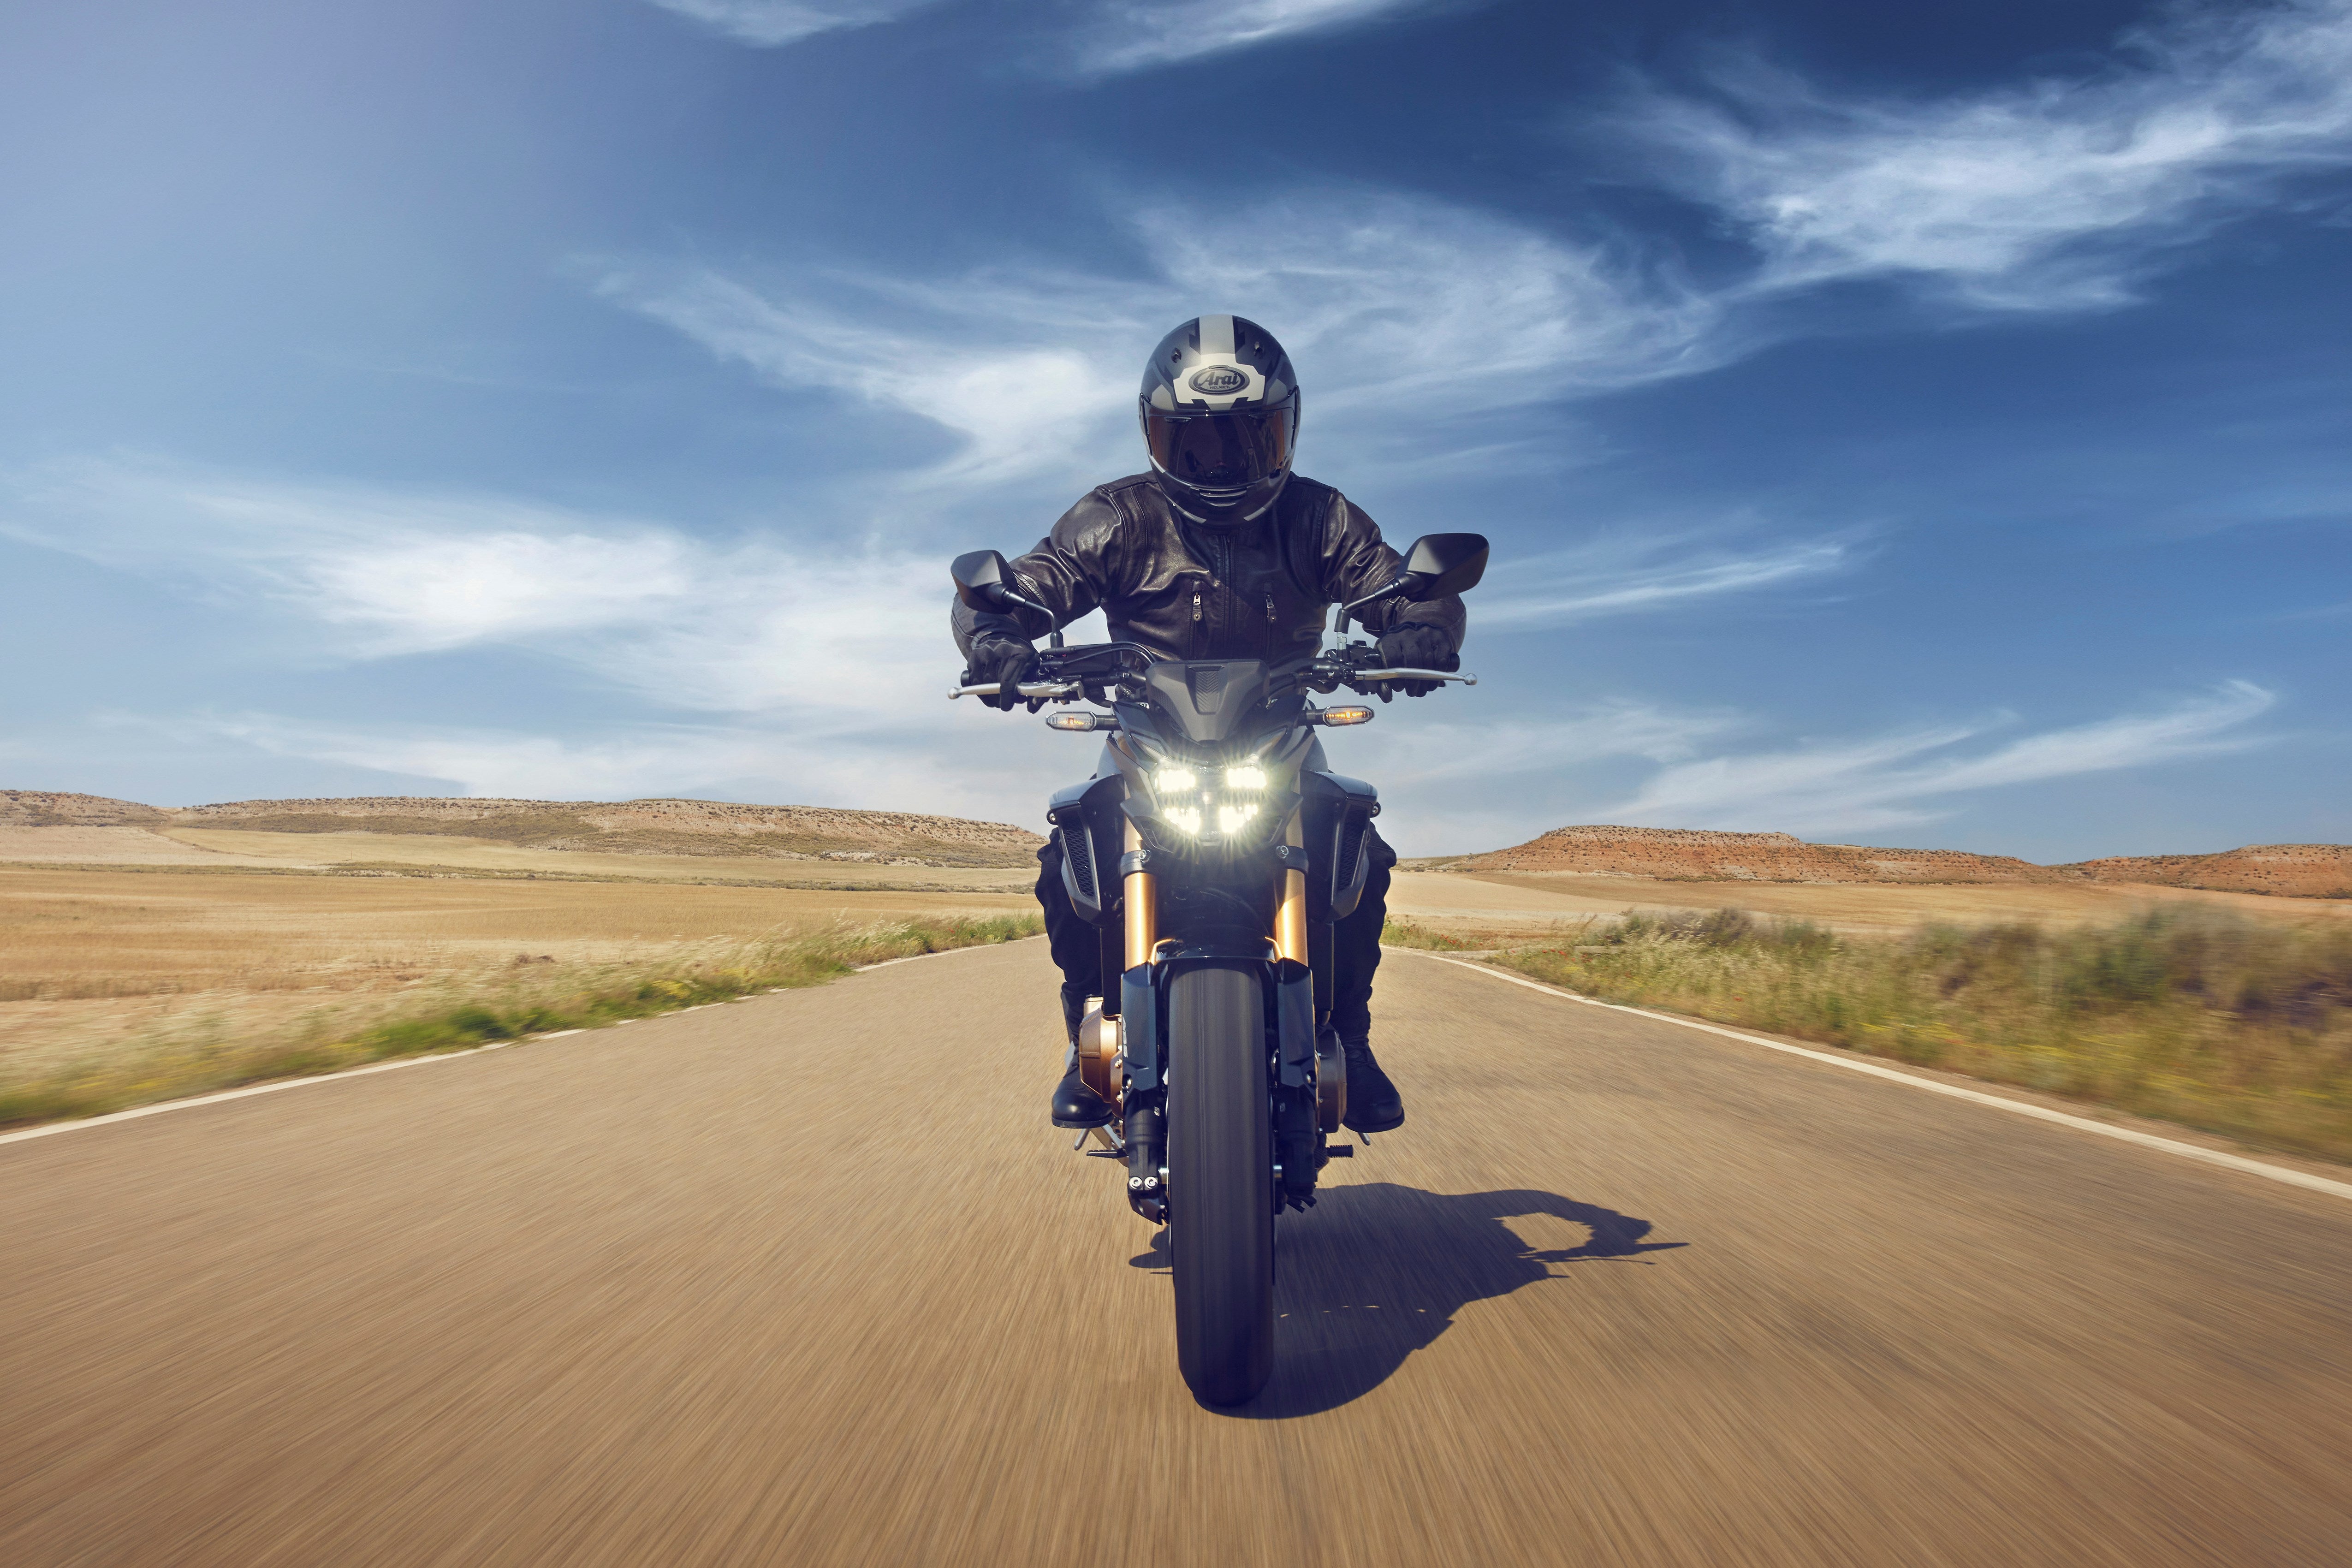 Motorcycle Training Courses in Bournemouth | Reduced Stepping Up | Honda of Bournemouth